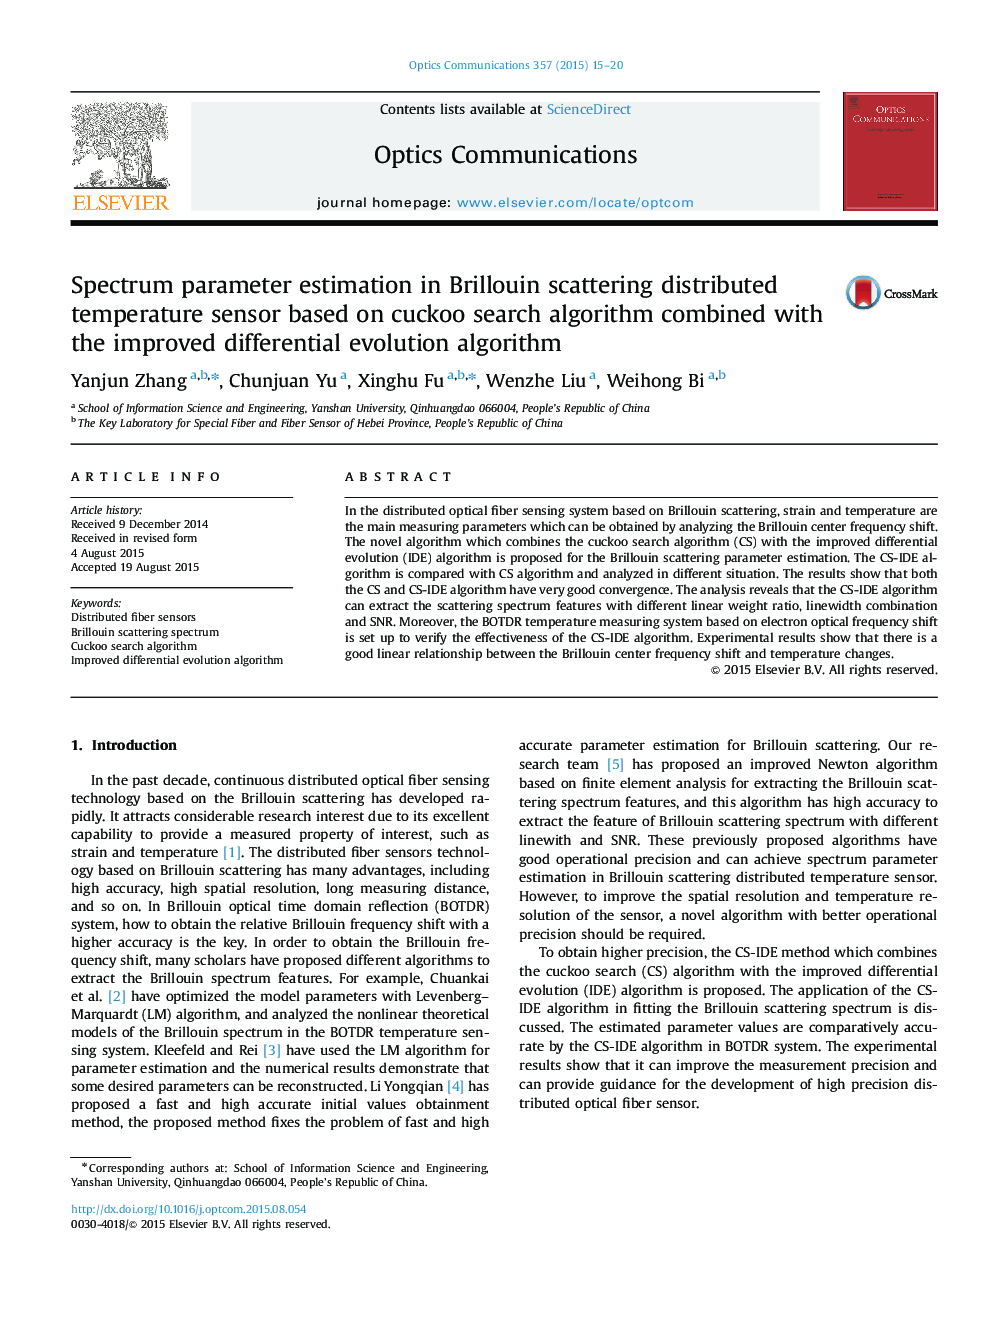 Spectrum parameter estimation in Brillouin scattering distributed temperature sensor based on cuckoo search algorithm combined with the improved differential evolution algorithm